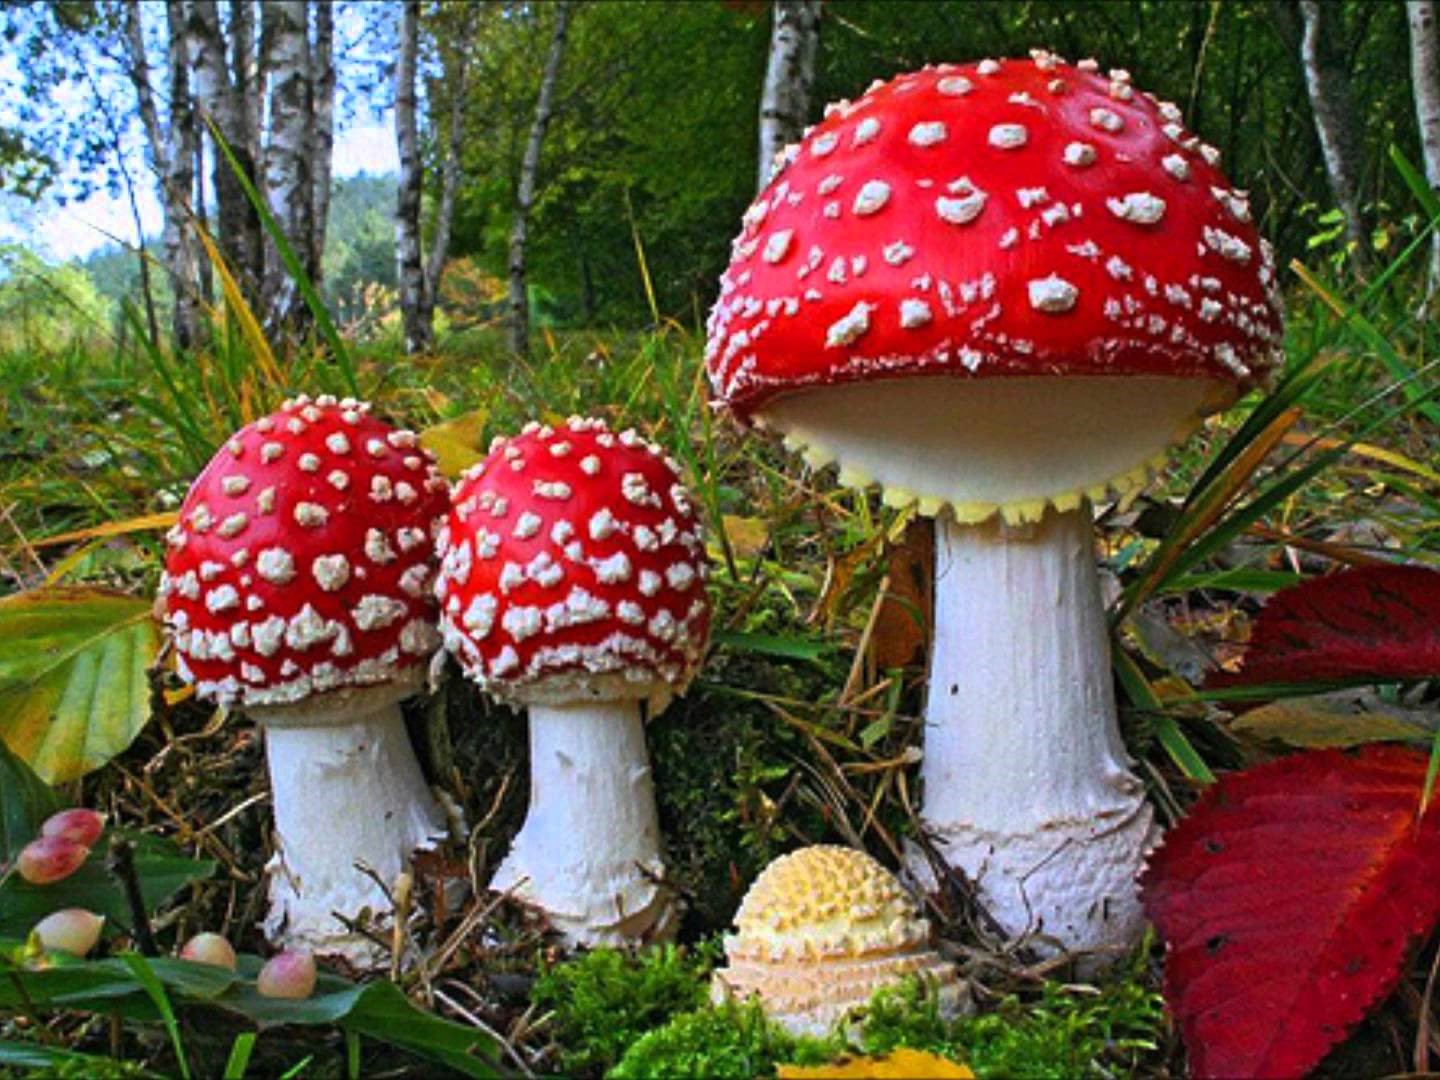 How High Can You Fly with ‘Fly Agaric’ (Amanita Muscaria)?